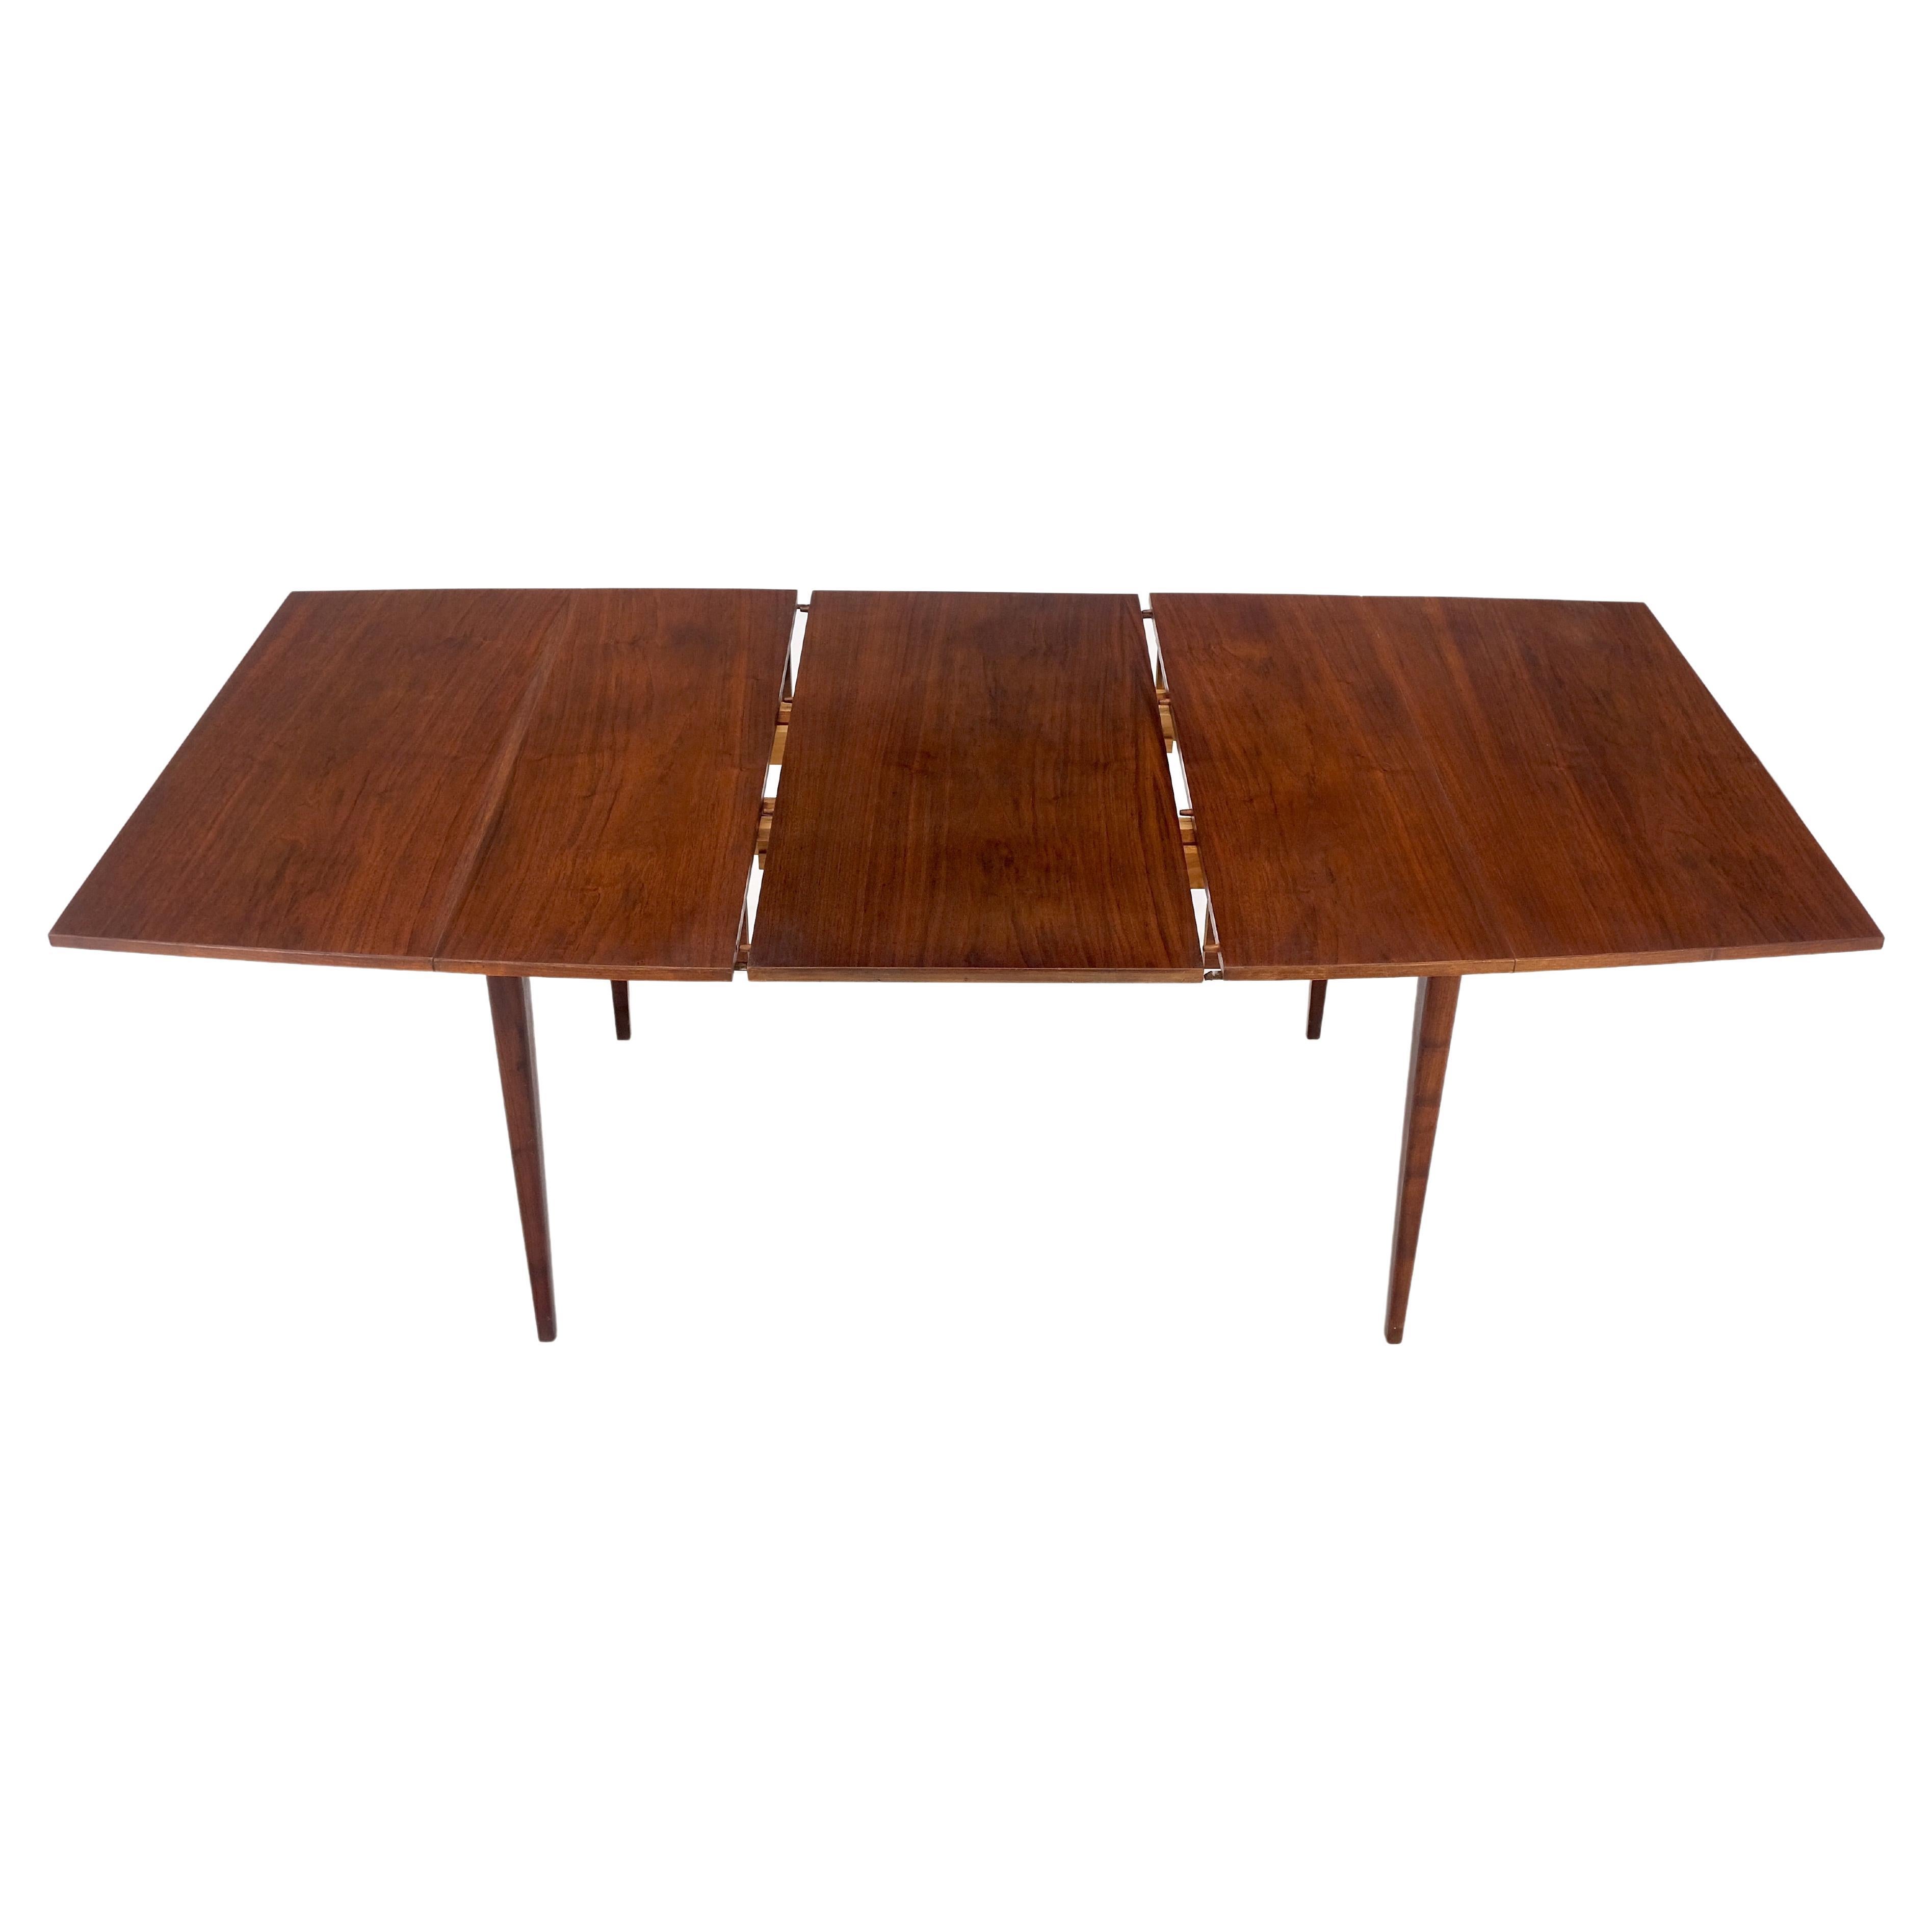 Danish Mid-Century Modern walnut drop leaf dining table w/ extension leaf mint!
Side leaves measure: 17 inches across. Center leaf measures: 20 inches across.